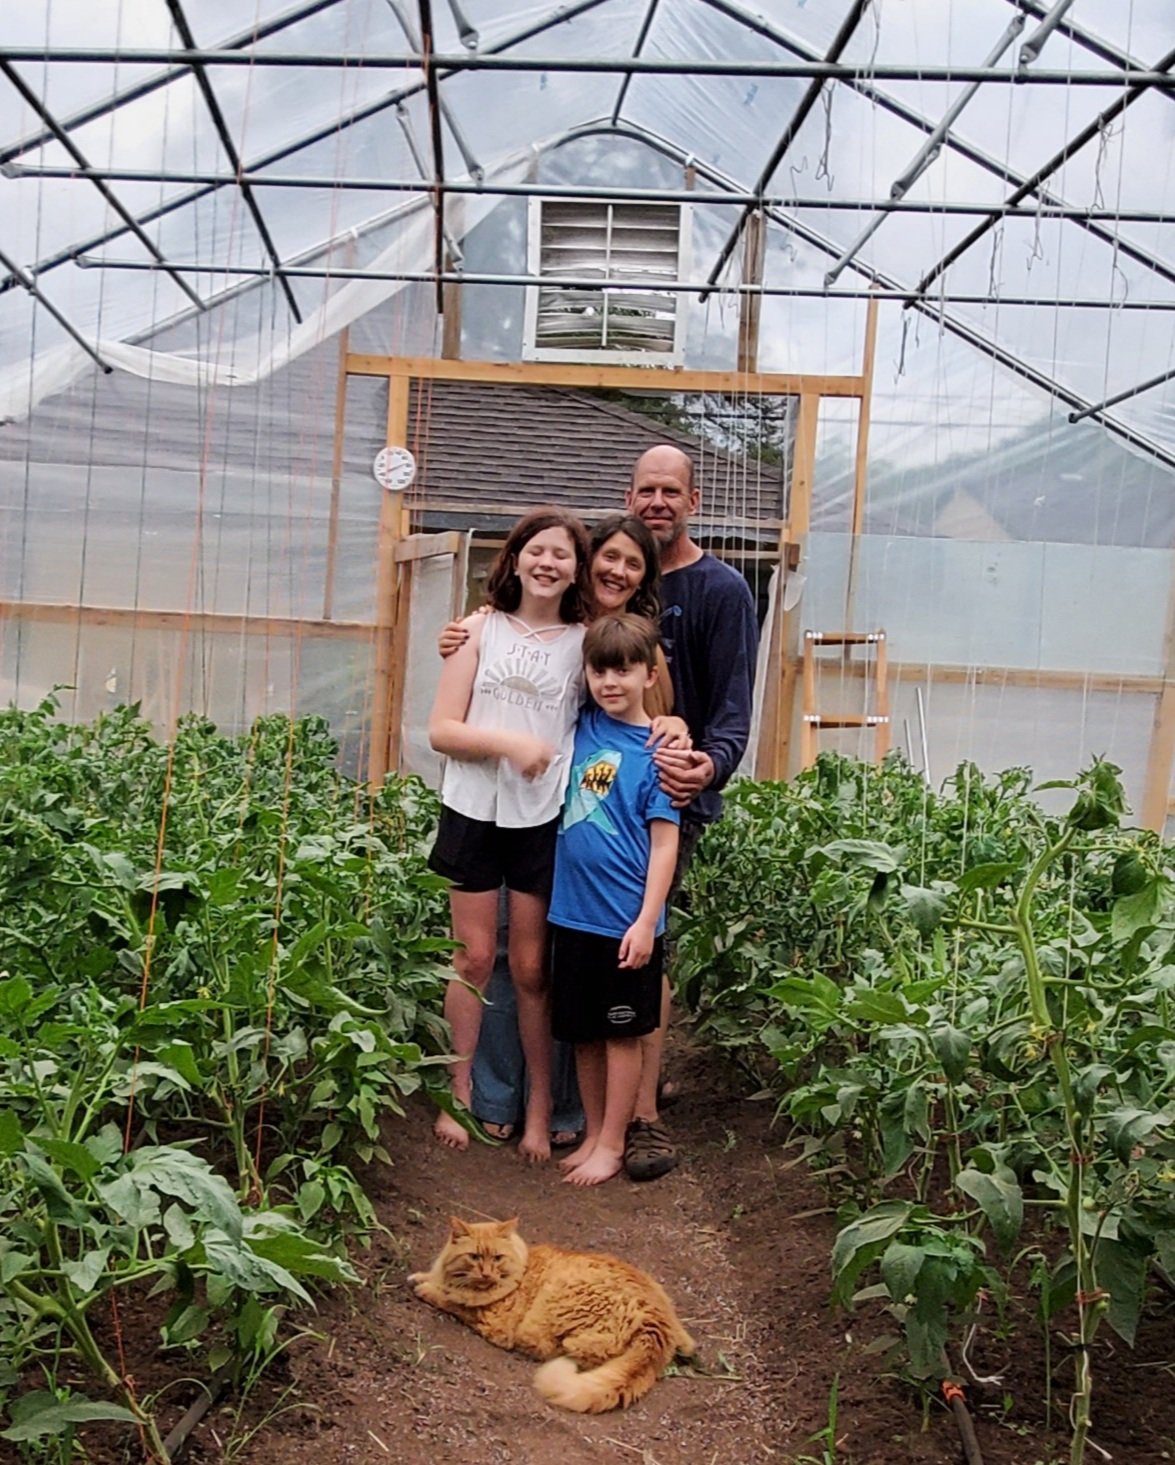 Gardening is a family passion for Longfellow residents David, Beth, Elsie (age 12) and Jack (age 9) Gray. Their latest project is a high-tunnel greenhouse and roadside stand south of Moon Palace Books. (Photo submitted)